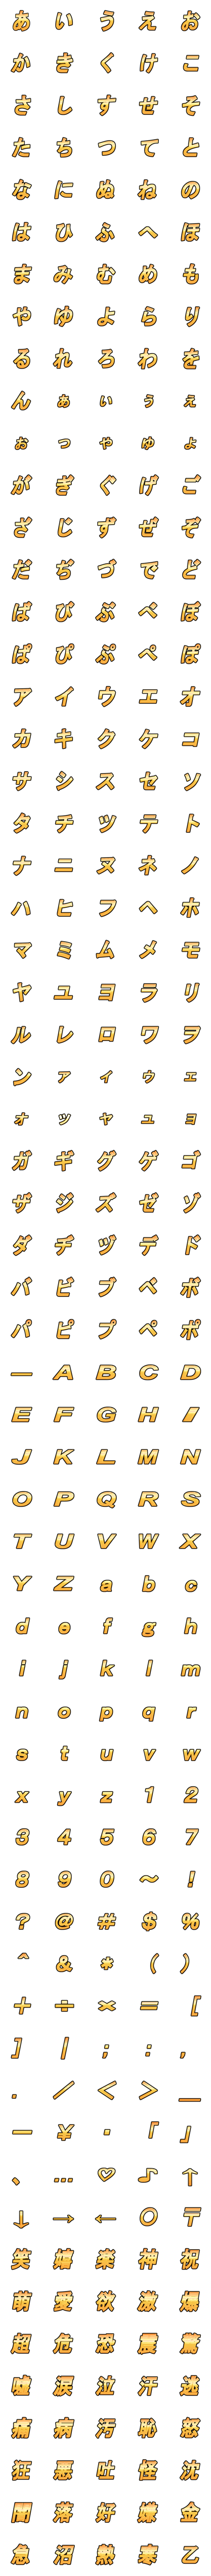 [LINE絵文字]シンプル絵文字☆メタリック・ゴールドの画像一覧